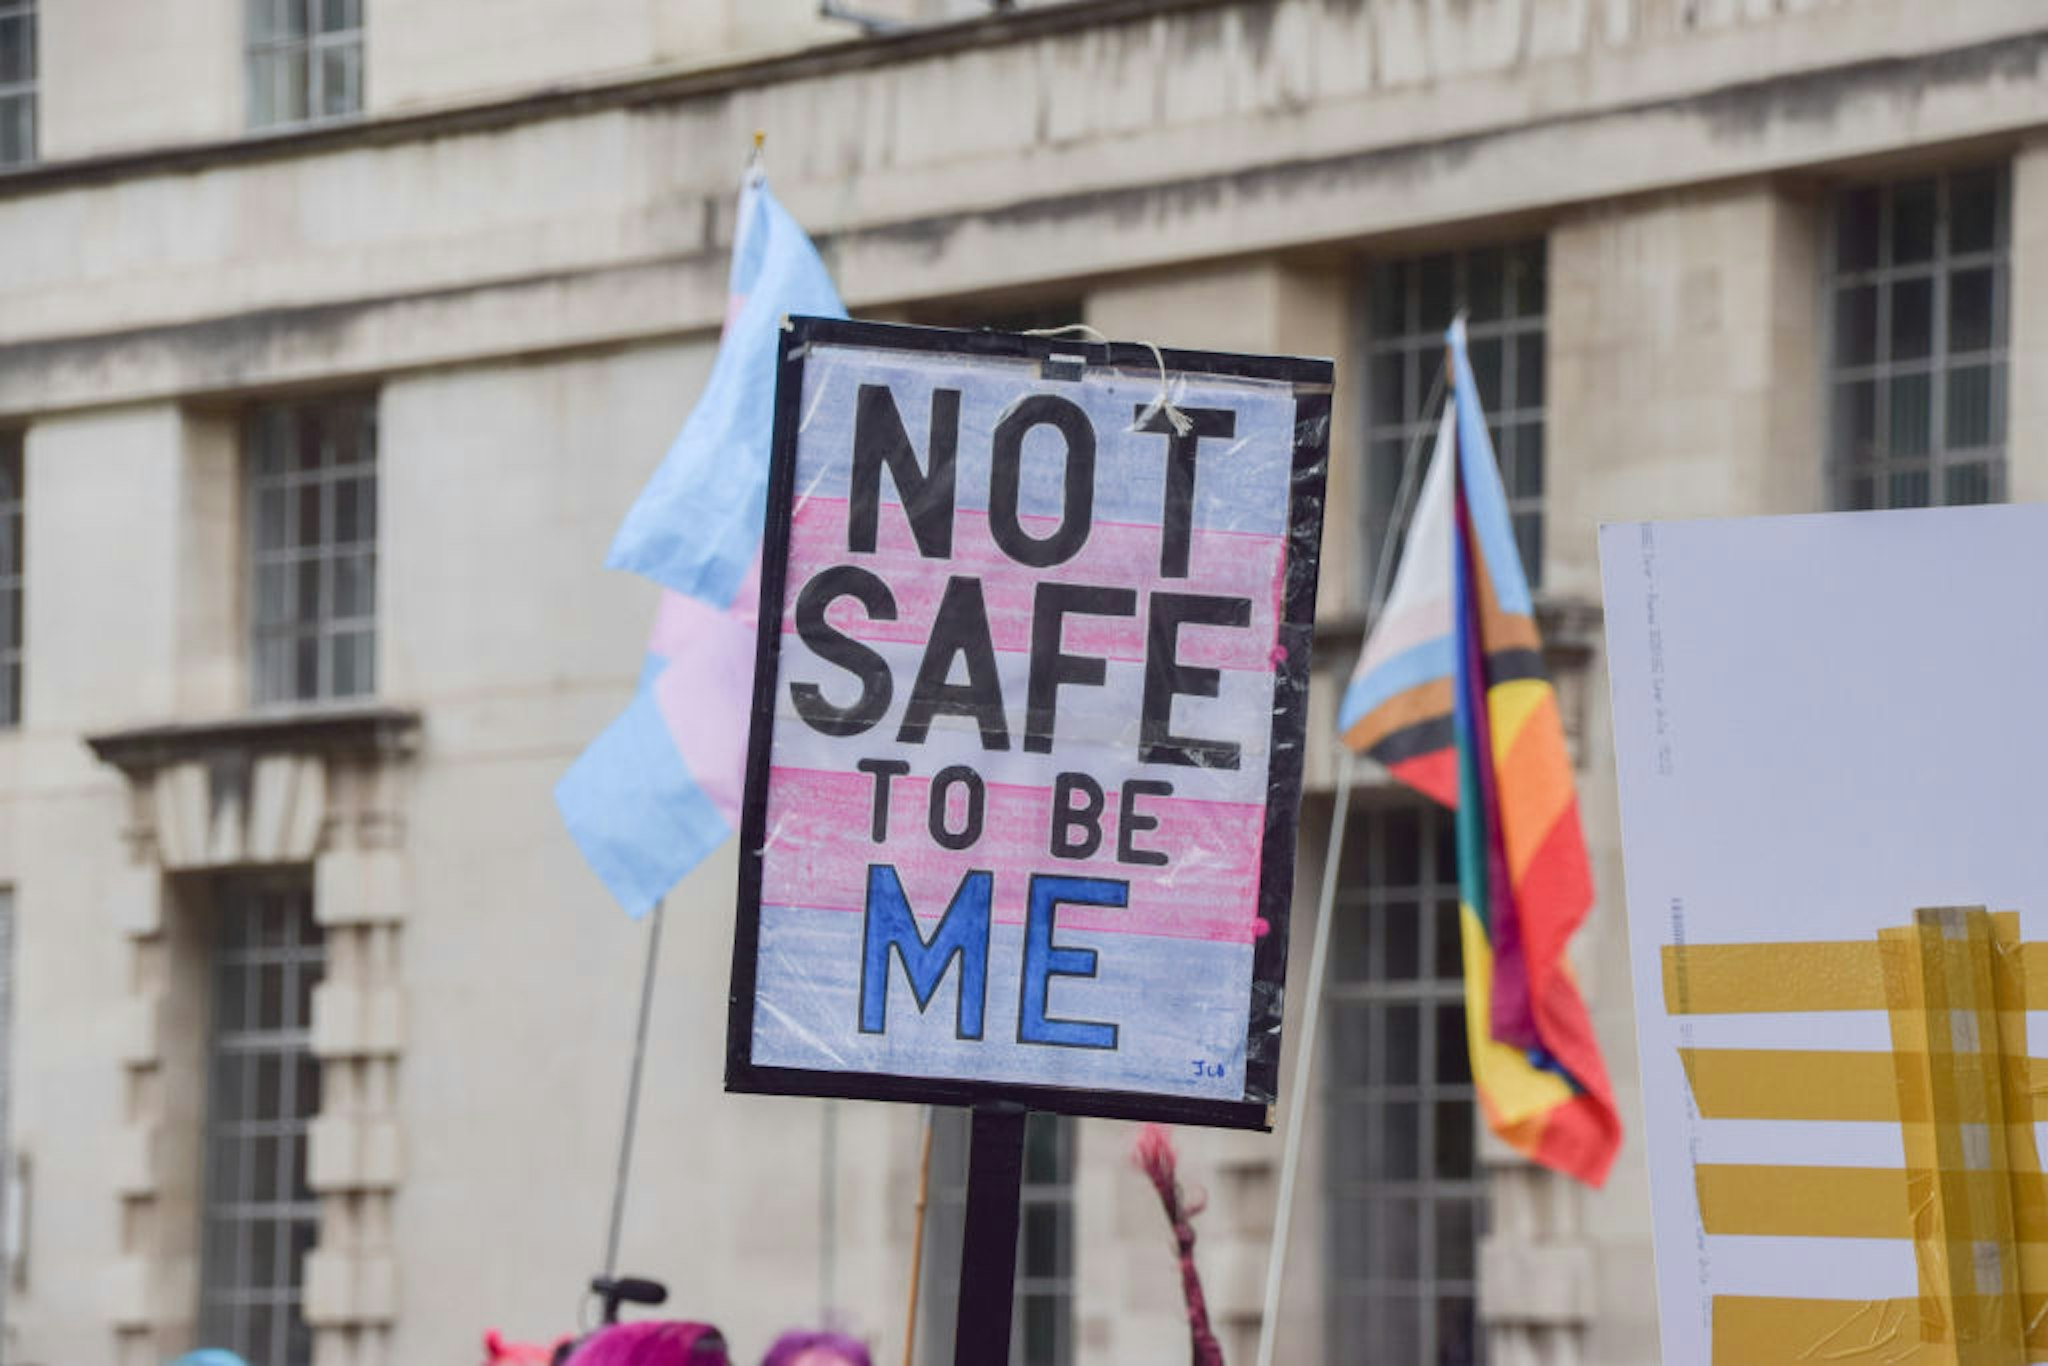 LONDON, UNITED KINGDOM - 2022/06/29: A protester holds a placard with the colours of the trans pride flag which reads "Not safe to be me" during the demonstration. Demonstrators gathered outside Downing Street in support of trans rights and demanded that the conversion therapy ban includes trans people. (Photo by Vuk Valcic/SOPA Images/LightRocket via Getty Images)